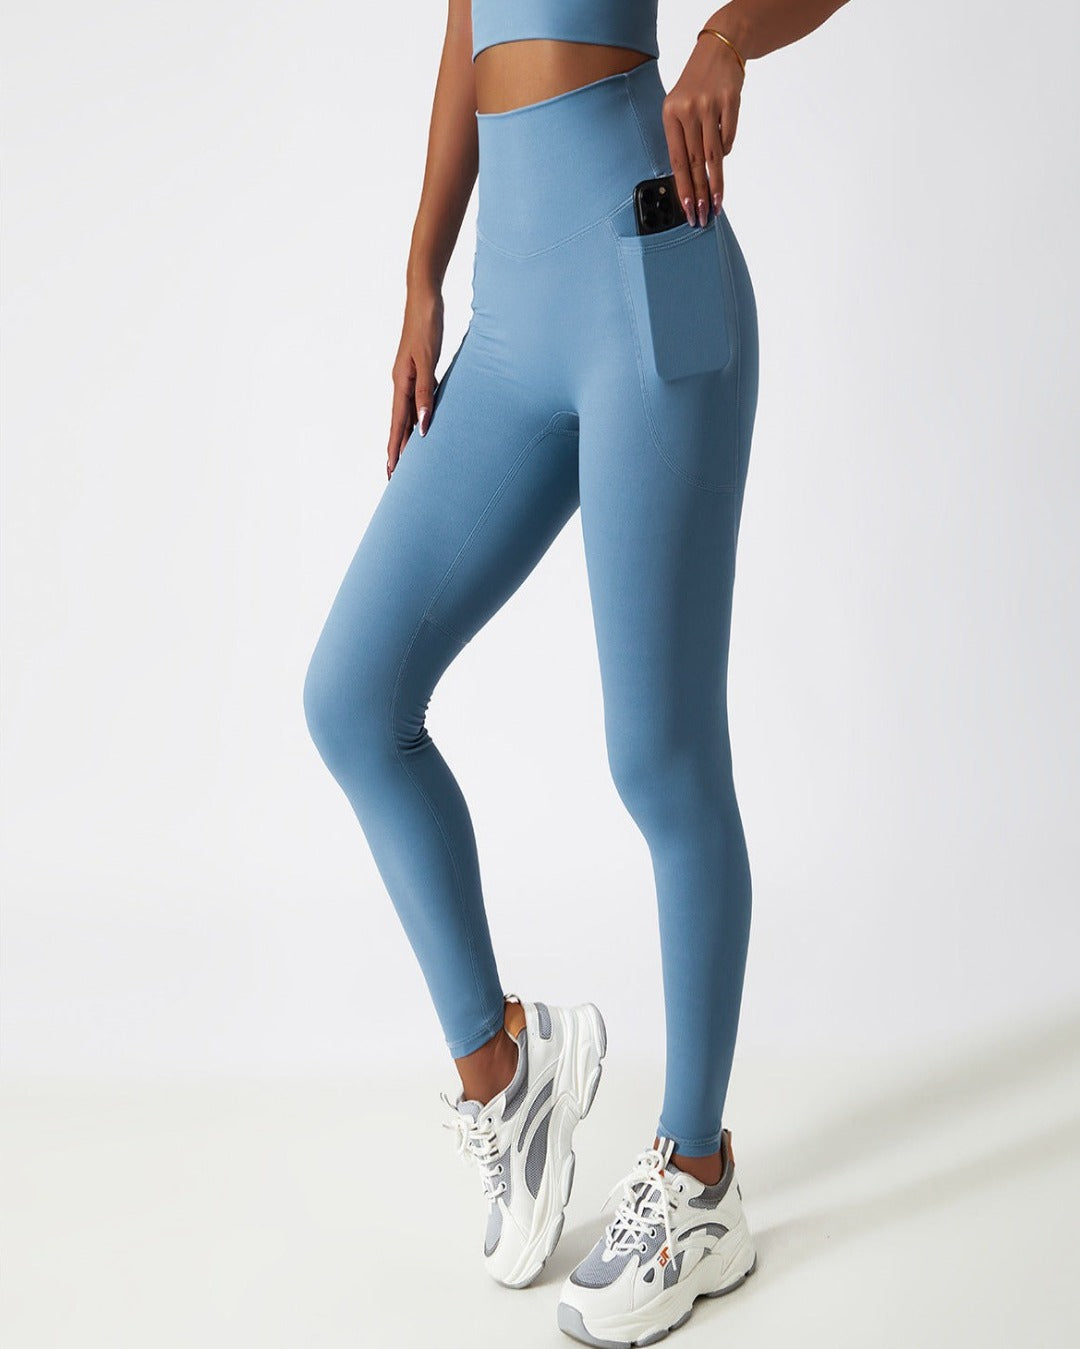 Steel Blue Buttery Smooth Leggings